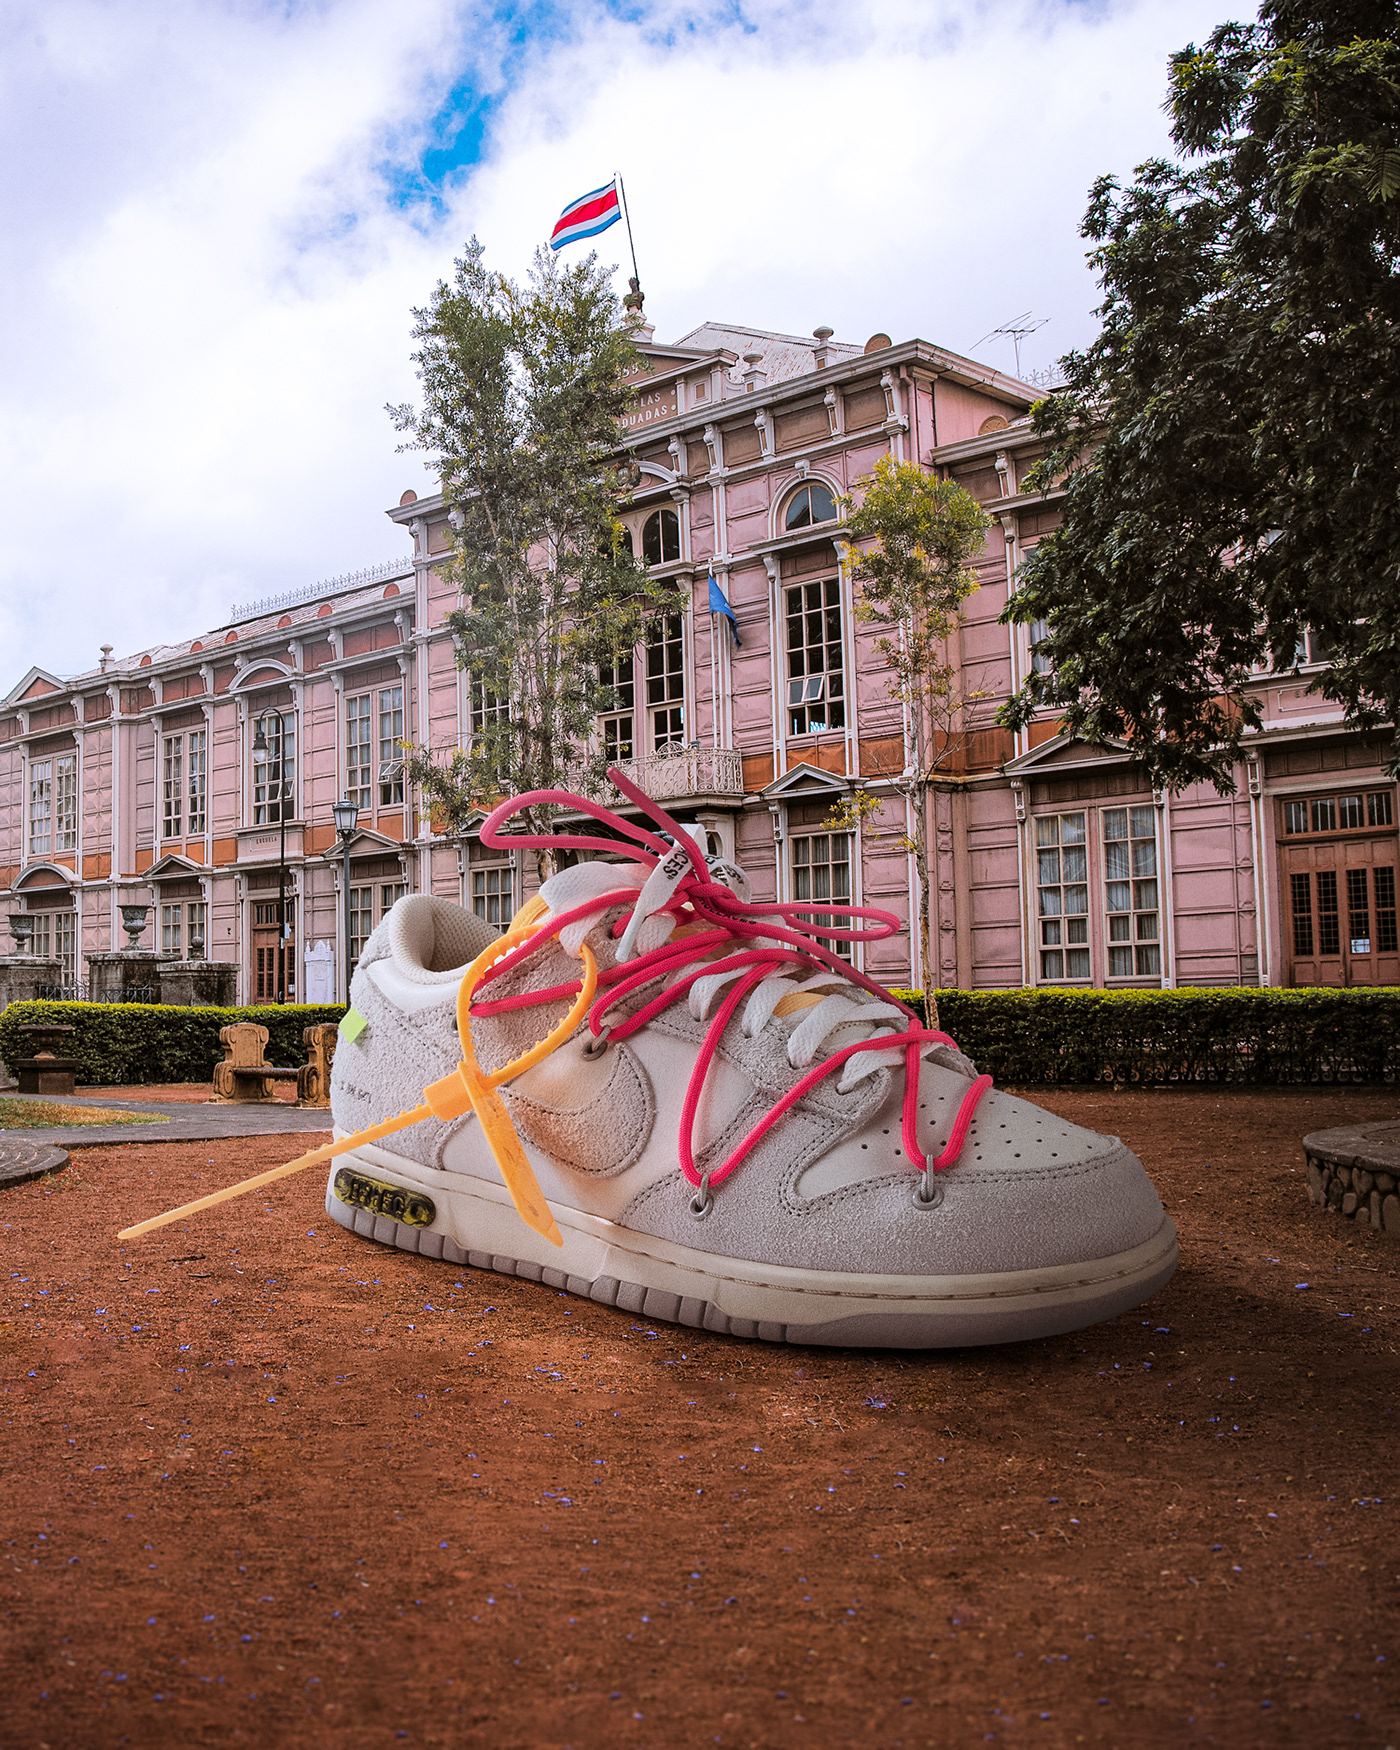 Photo composite of giant sneaker in Costa Rica . Retouching using Photoshop